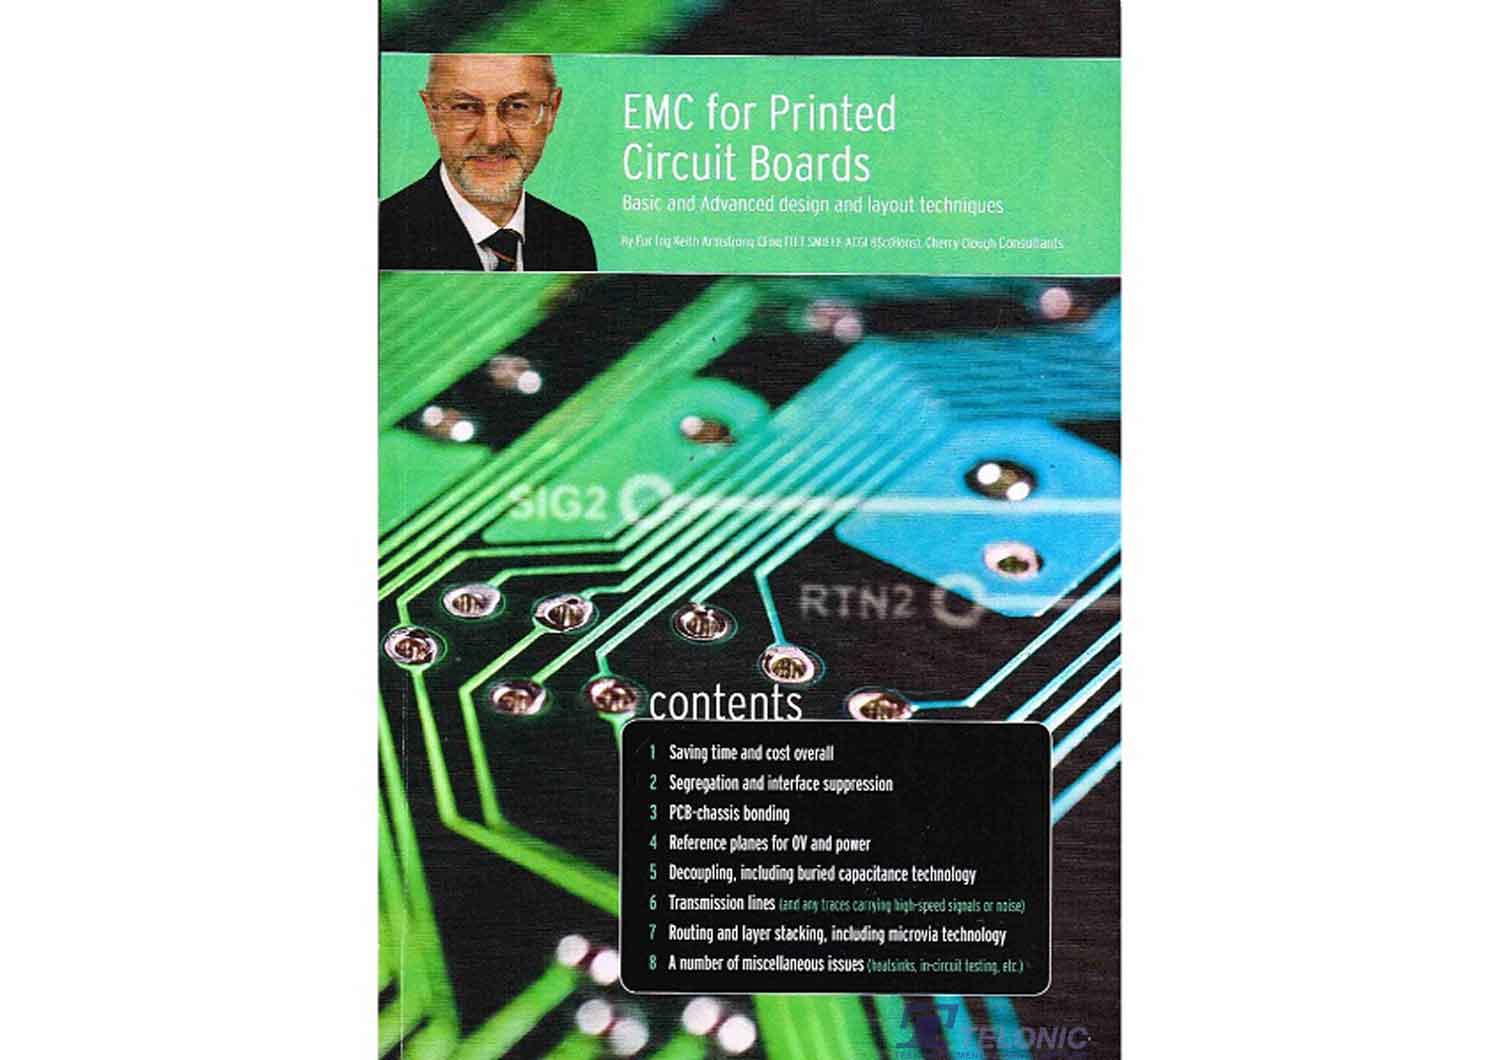 EMC for Printed Circuit Boards - Keith Armstrong